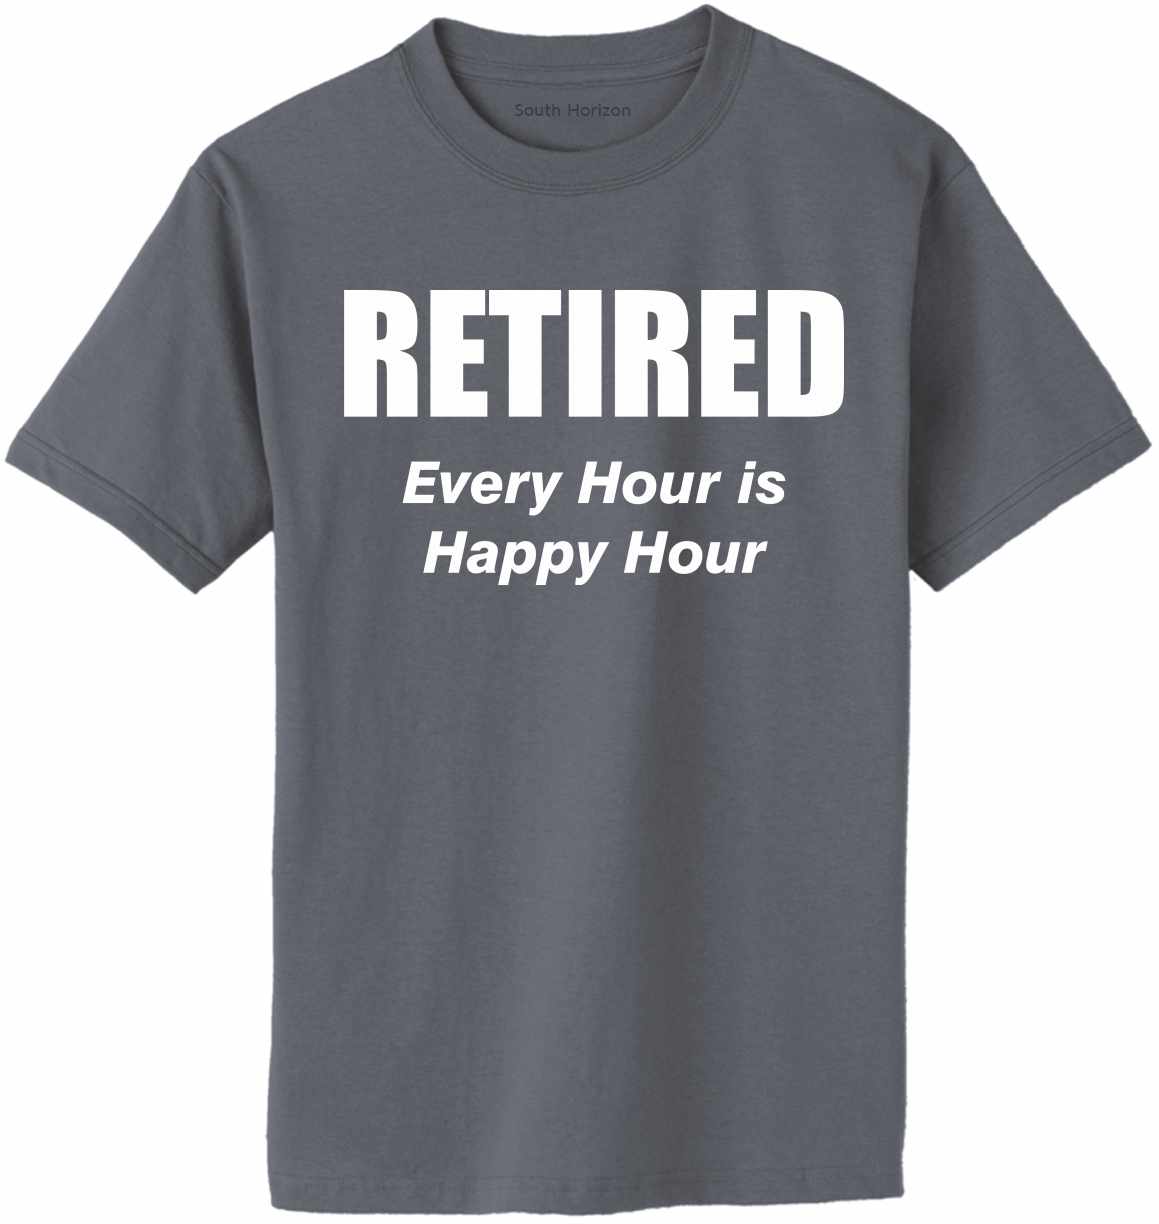 RETIRED, Every Hour Is Happy Hour Adult T-Shirt (#919-1)